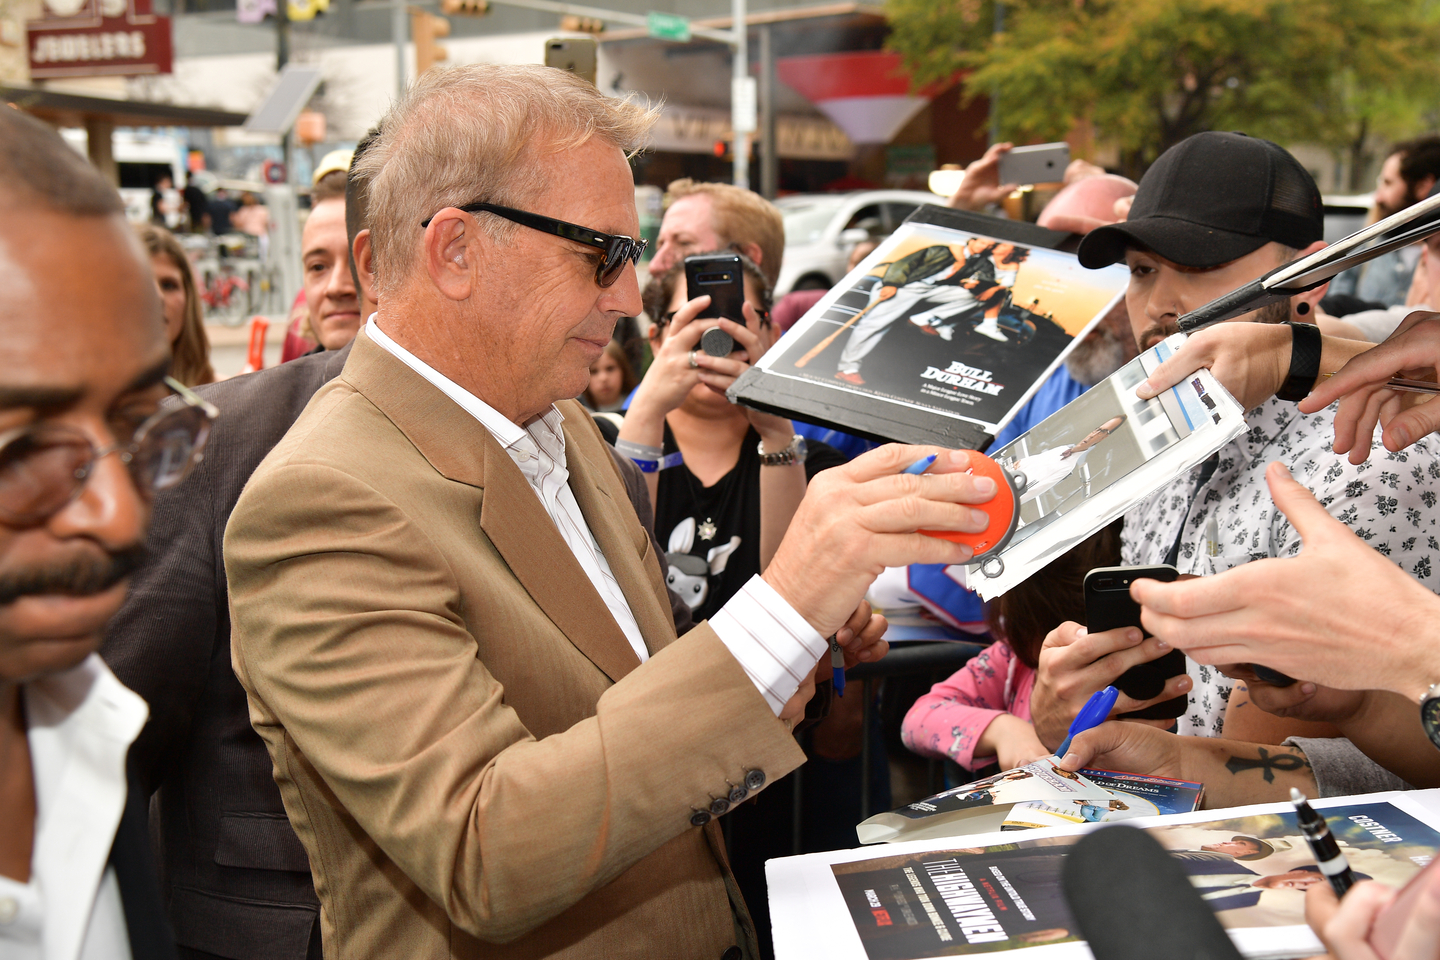 Kevin Costner at The Highwaymen World Premiere – Photo by Matt Winkelmeyer/Getty Images for SXSW